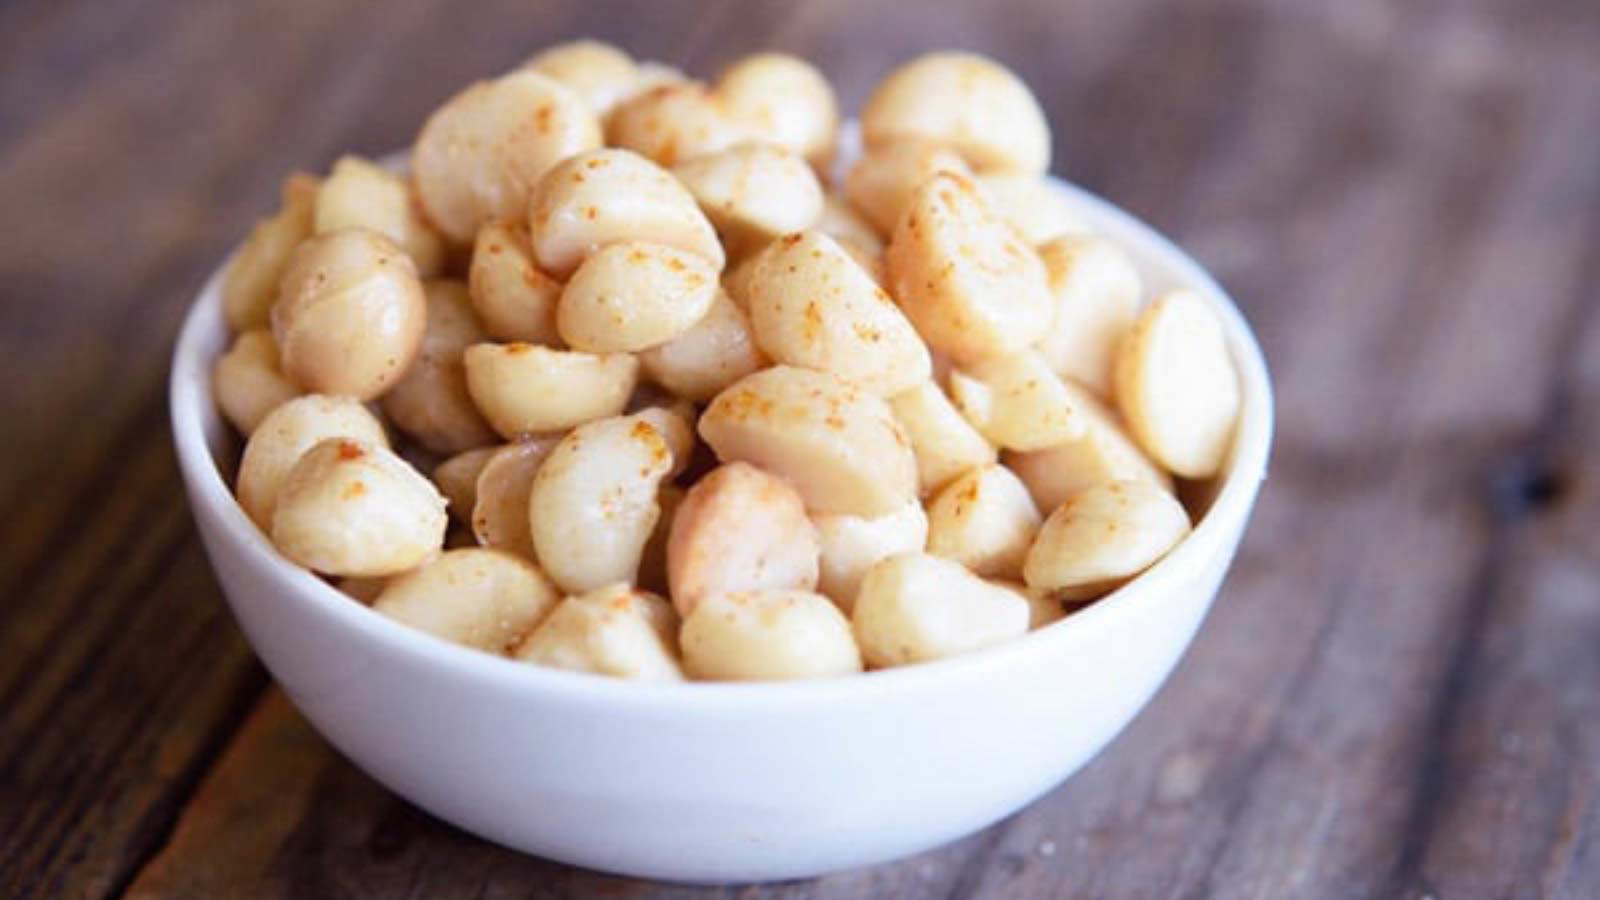 <p>If you are looking for a snack that was made for road trips, you have to try these <a href="https://www.thegraciouspantry.com/clean-eating-spicy-sweet-macadamia-nuts-recipe/">sweet and spicy macadamia nuts</a>. Macadamia Nuts, cayenne pepper, and liquid stevia are all you need for this tasty snack, and you can adjust the sweetness and spice to your preferences. </p>